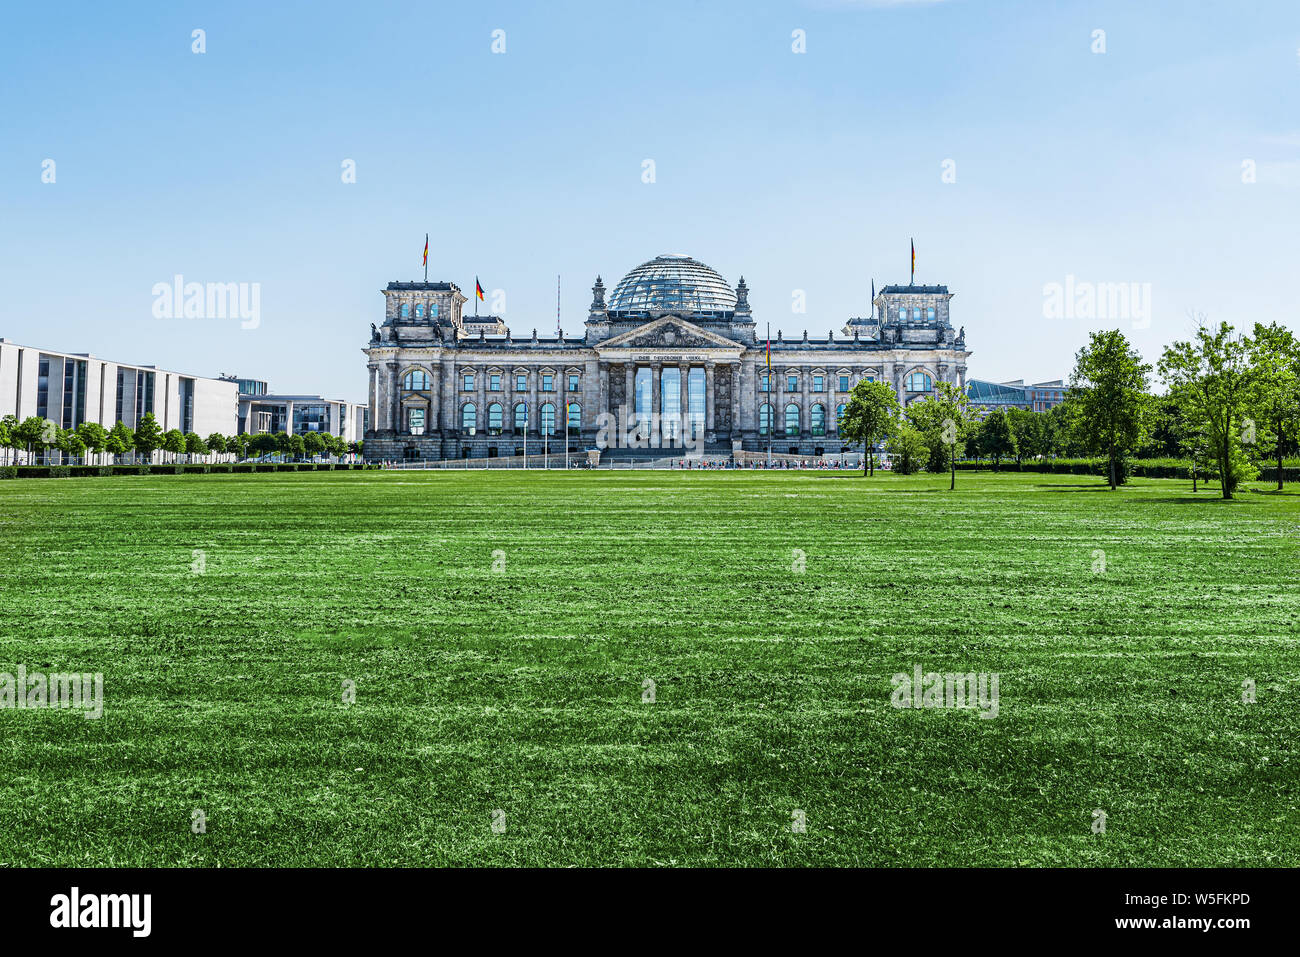 Reichstag building in Berlin, Germany, meeting place of the German parliament Bundestag on sunny summer day Stock Photo